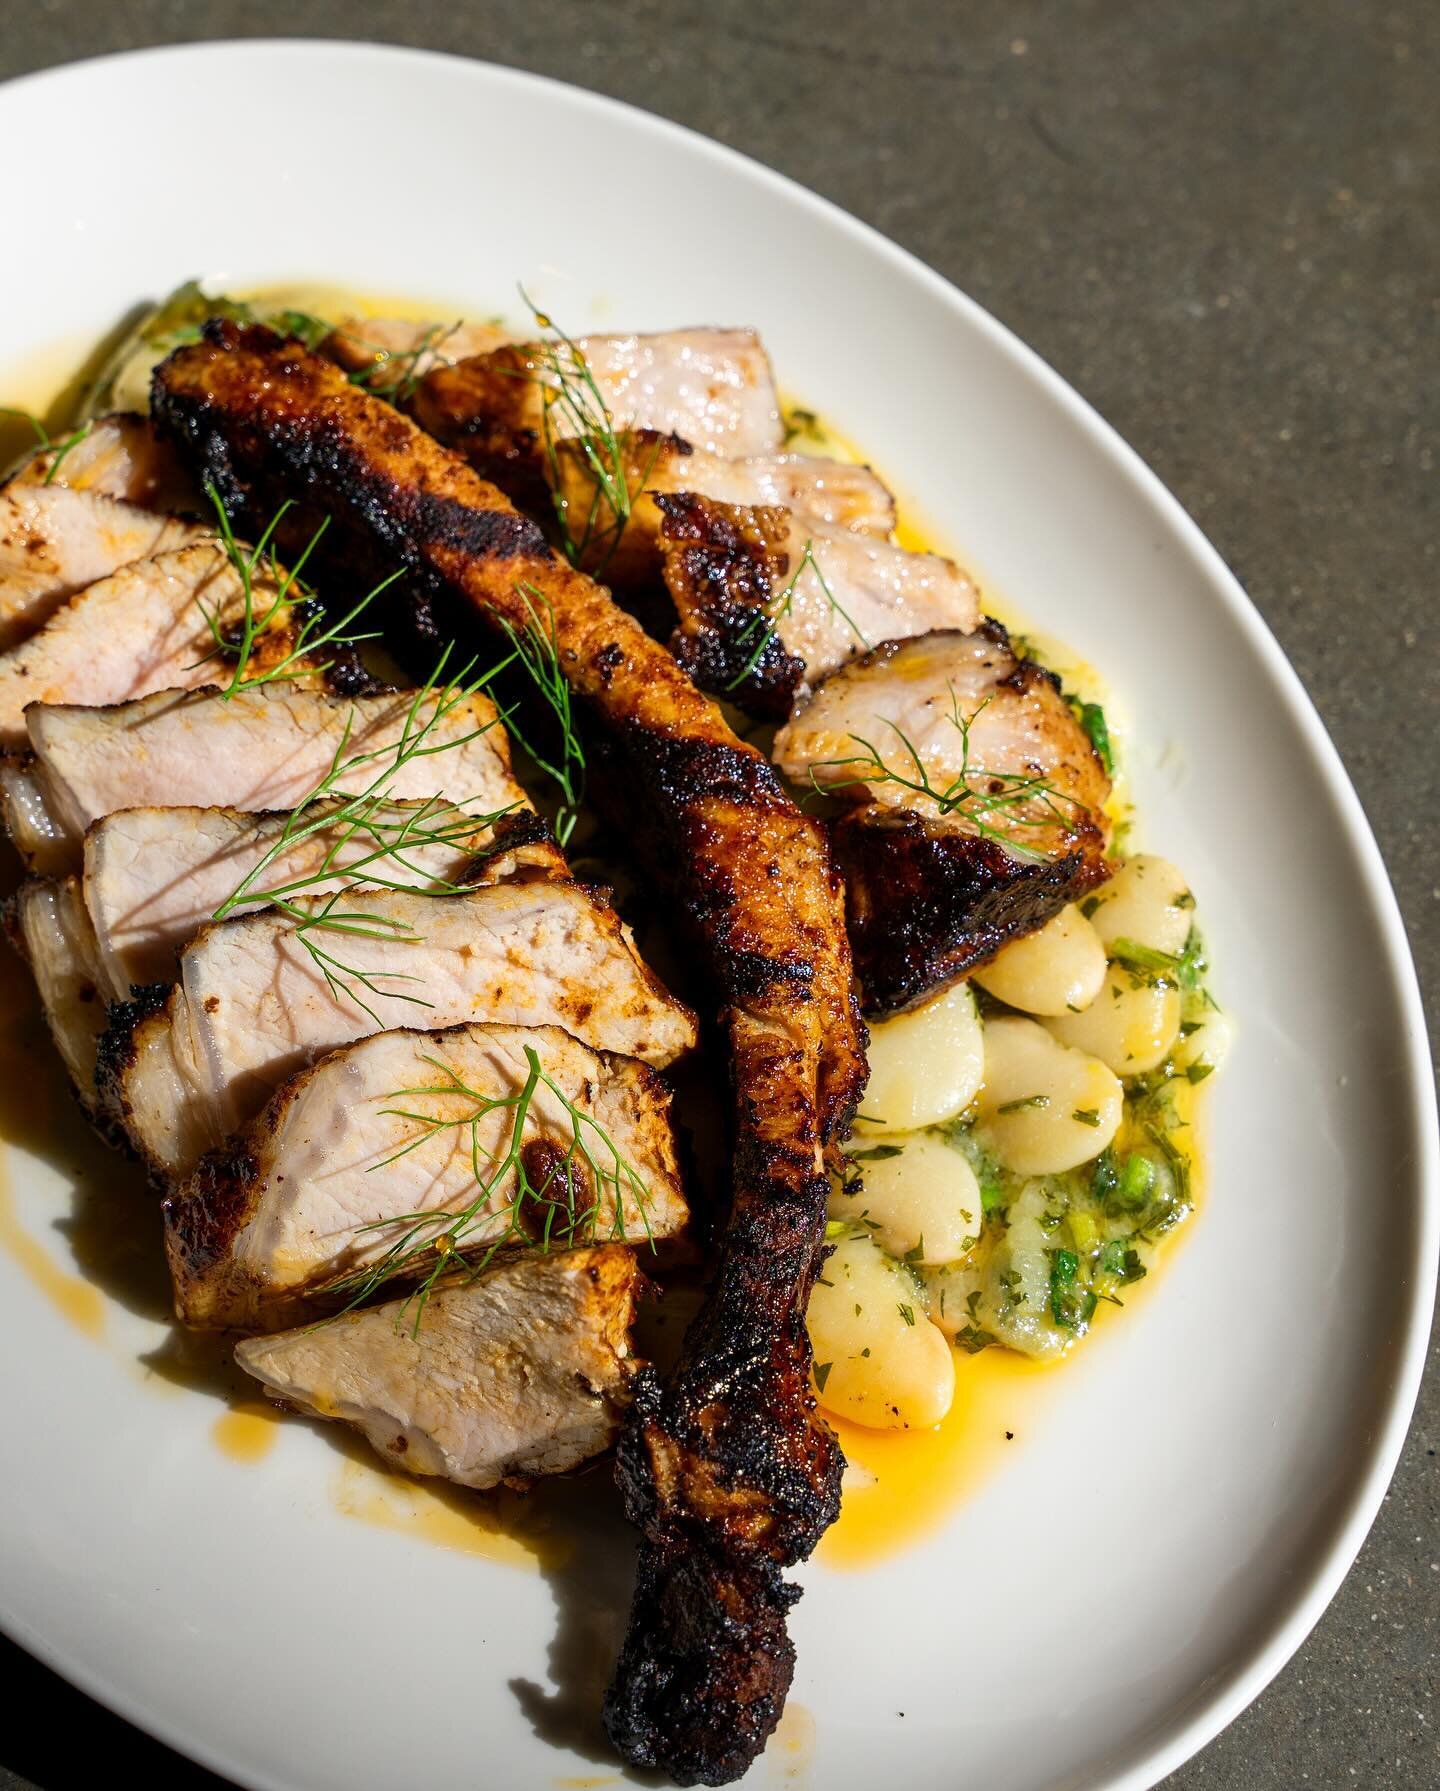 One of several new dishes on the menu this week! 

Smoked Harissa Mohawk Pork Chop with Salsa Verde Butter Beans. We love the Mohawk chop at Mayfield as it gives you the best of both worlds, chop on one side and the belly on the other!

#chef #restau